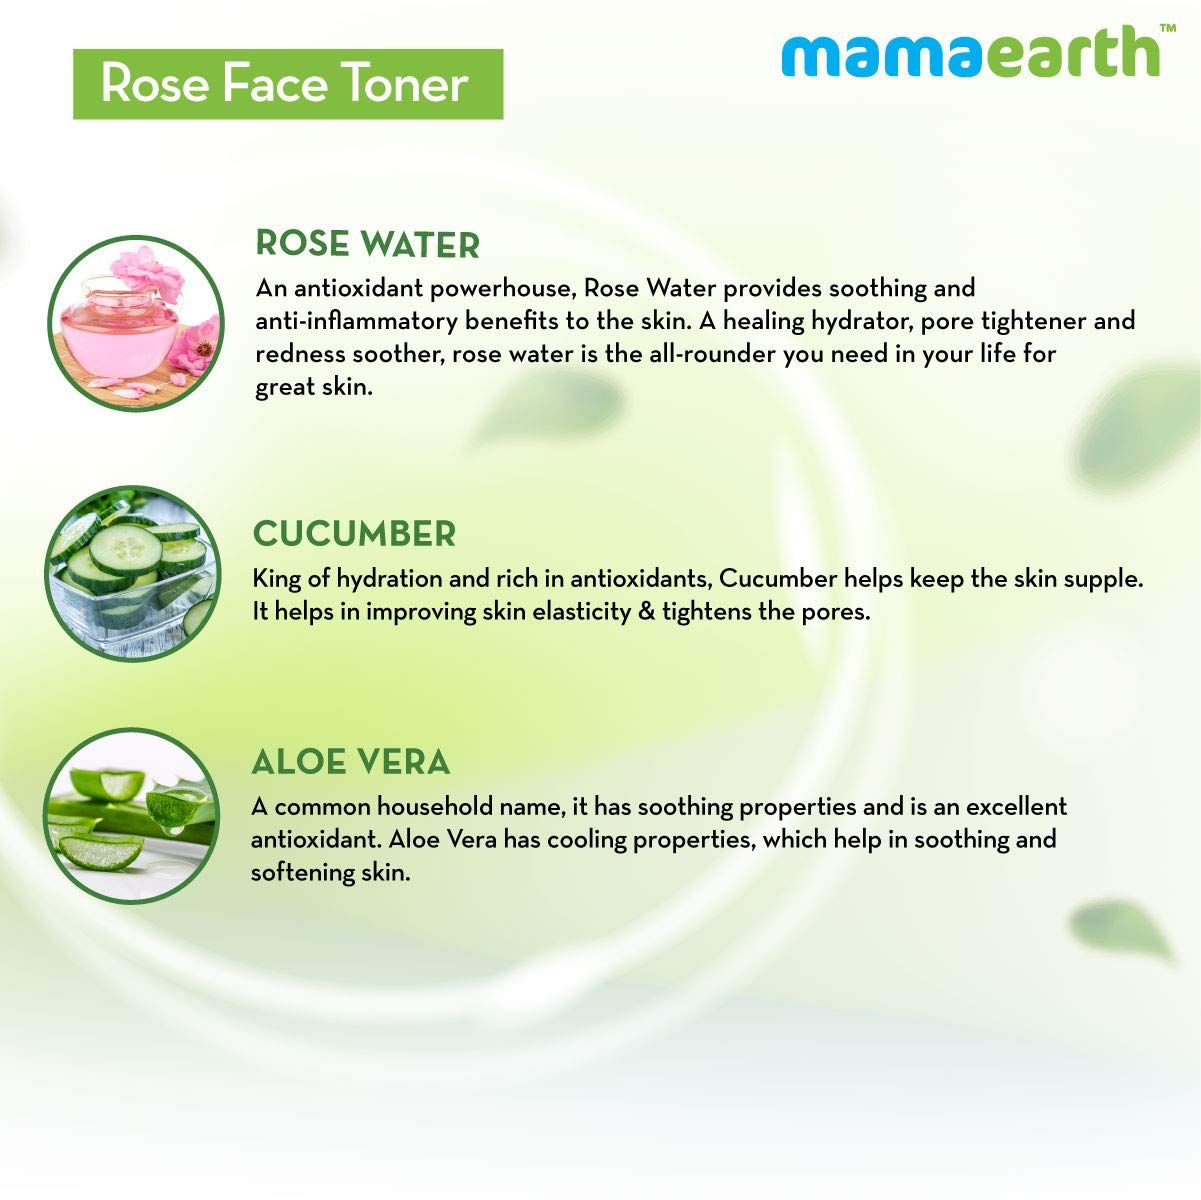 Rose Face Toner with Witch Hazel and Rose Water for Pore Tightening - 200ml